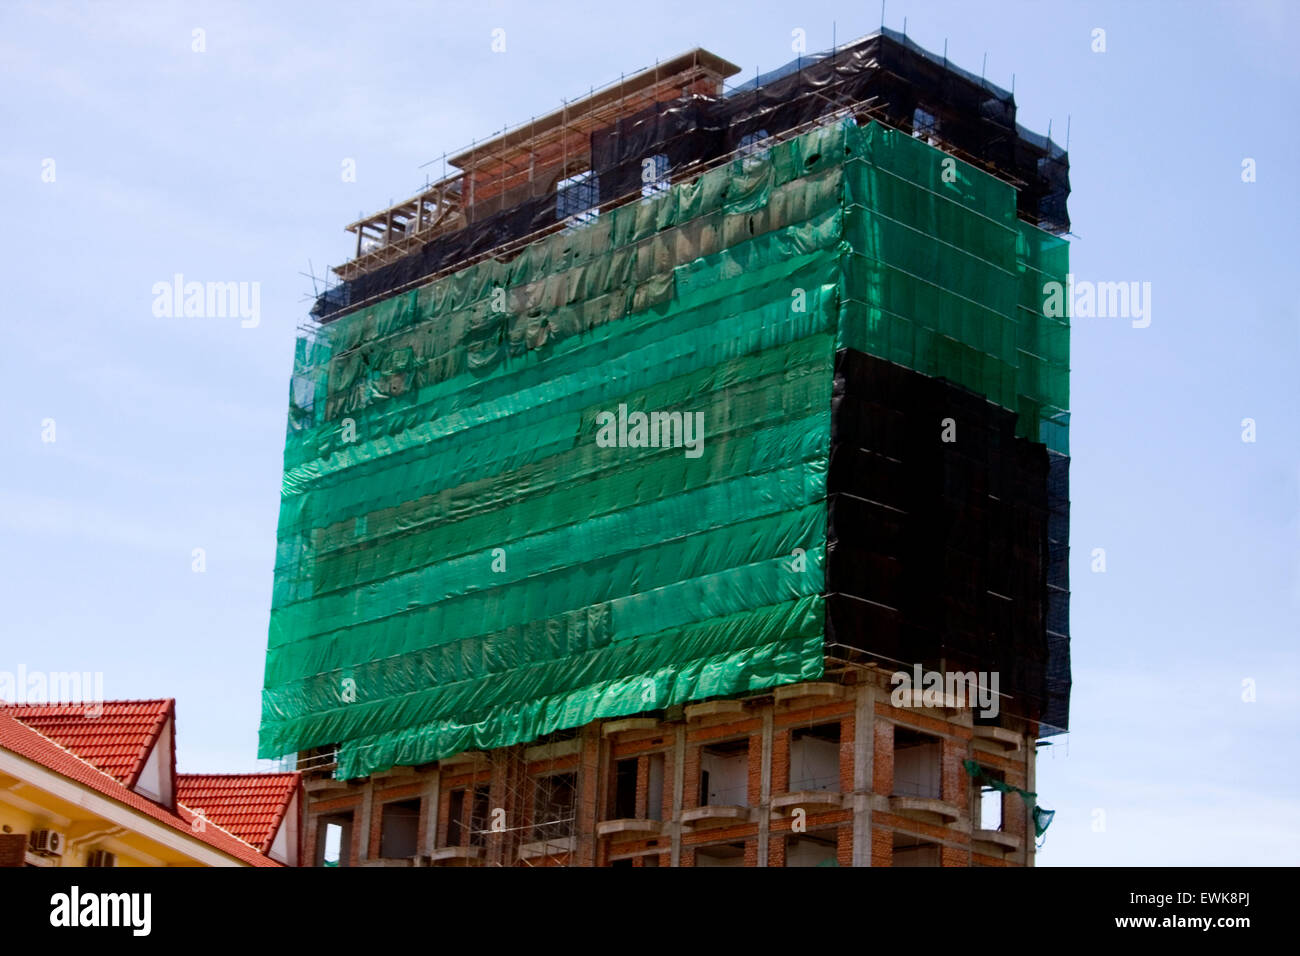 A new highrise cement & brick building is covered with a green tarp above a city street in Kampong Cham, Cambodia. Stock Photo